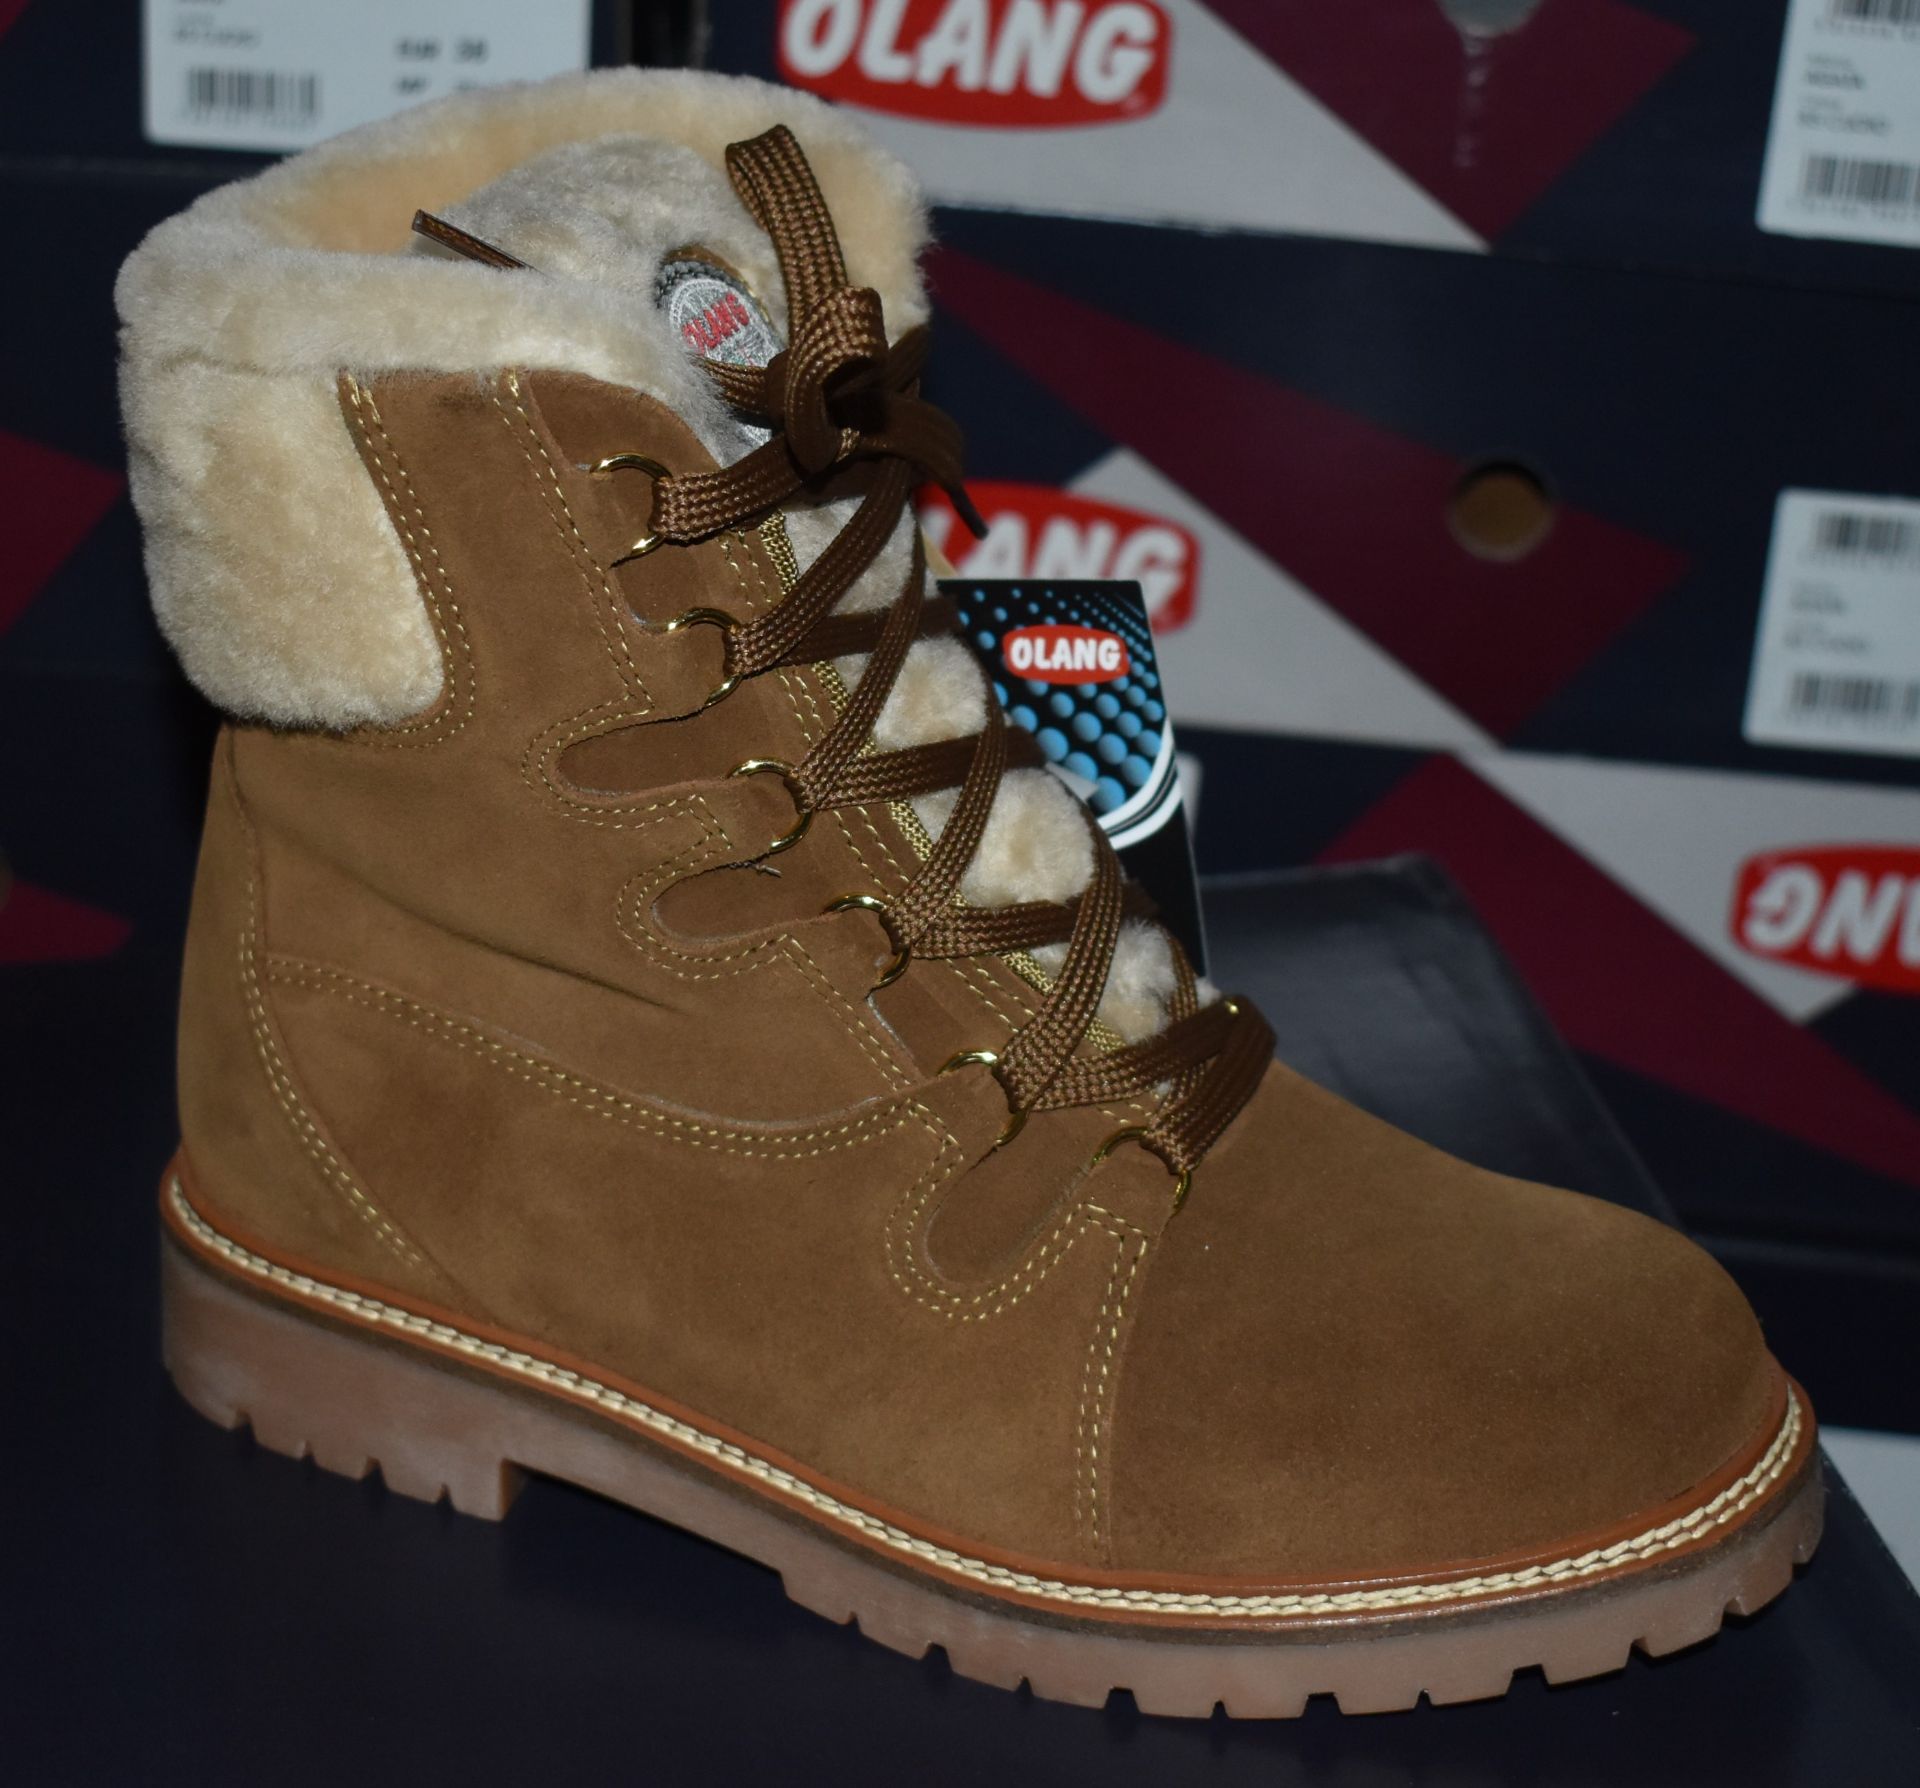 1 x Pair of Designer Olang Meribel 85 CUOIO Women's Winter Boots - Euro Size 38 - Brand New Boxed - Image 4 of 8